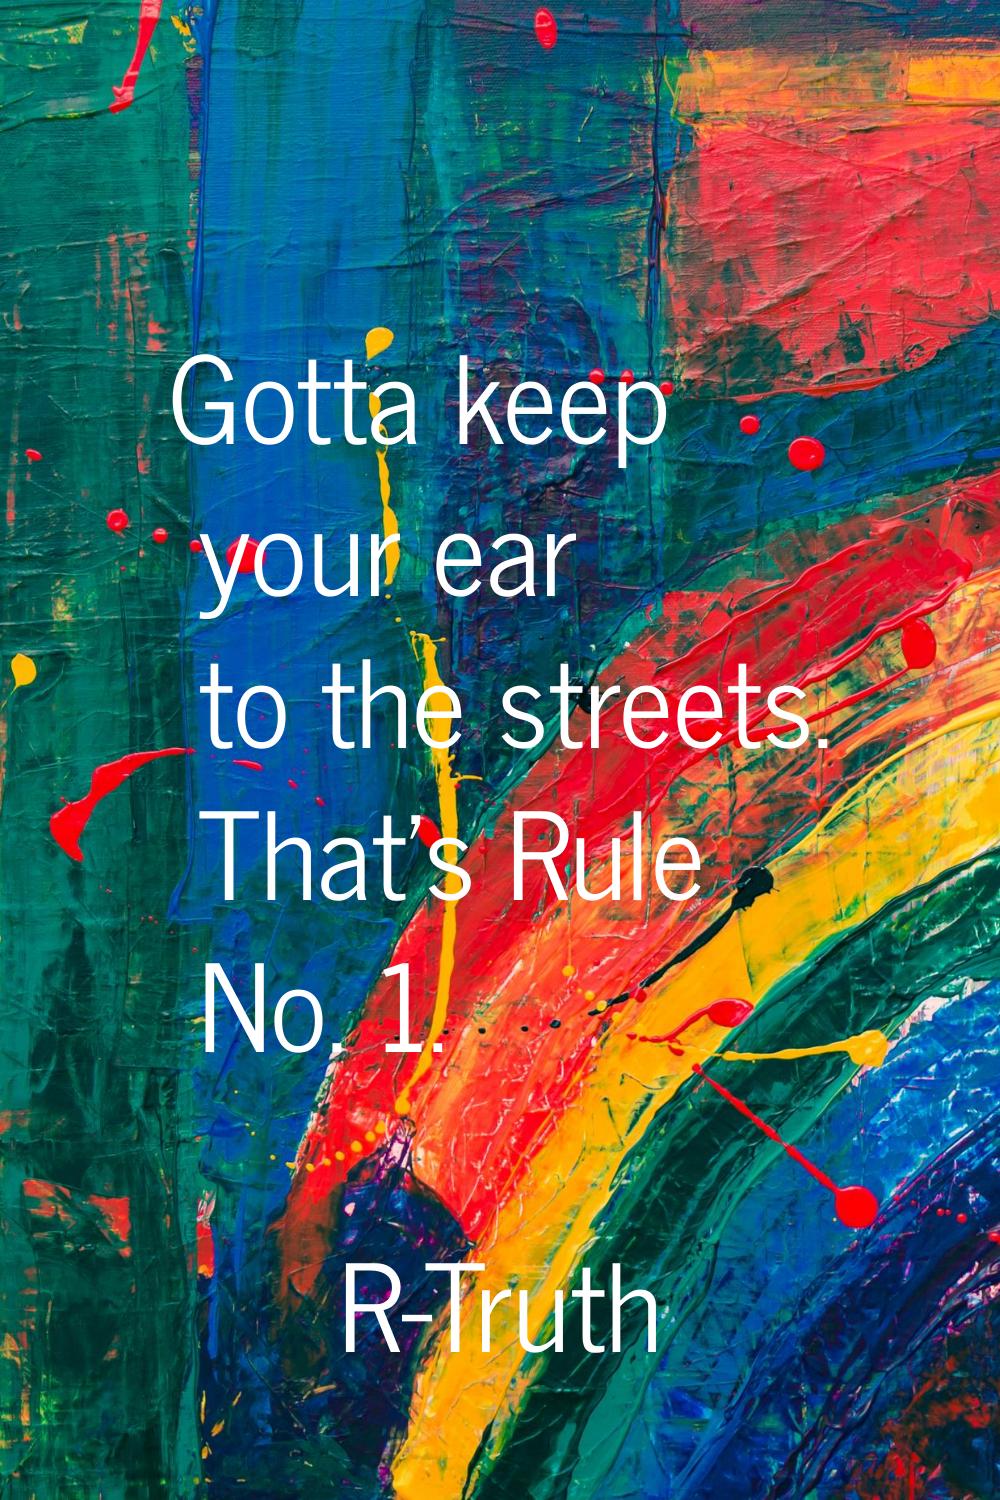 Gotta keep your ear to the streets. That's Rule No. 1.